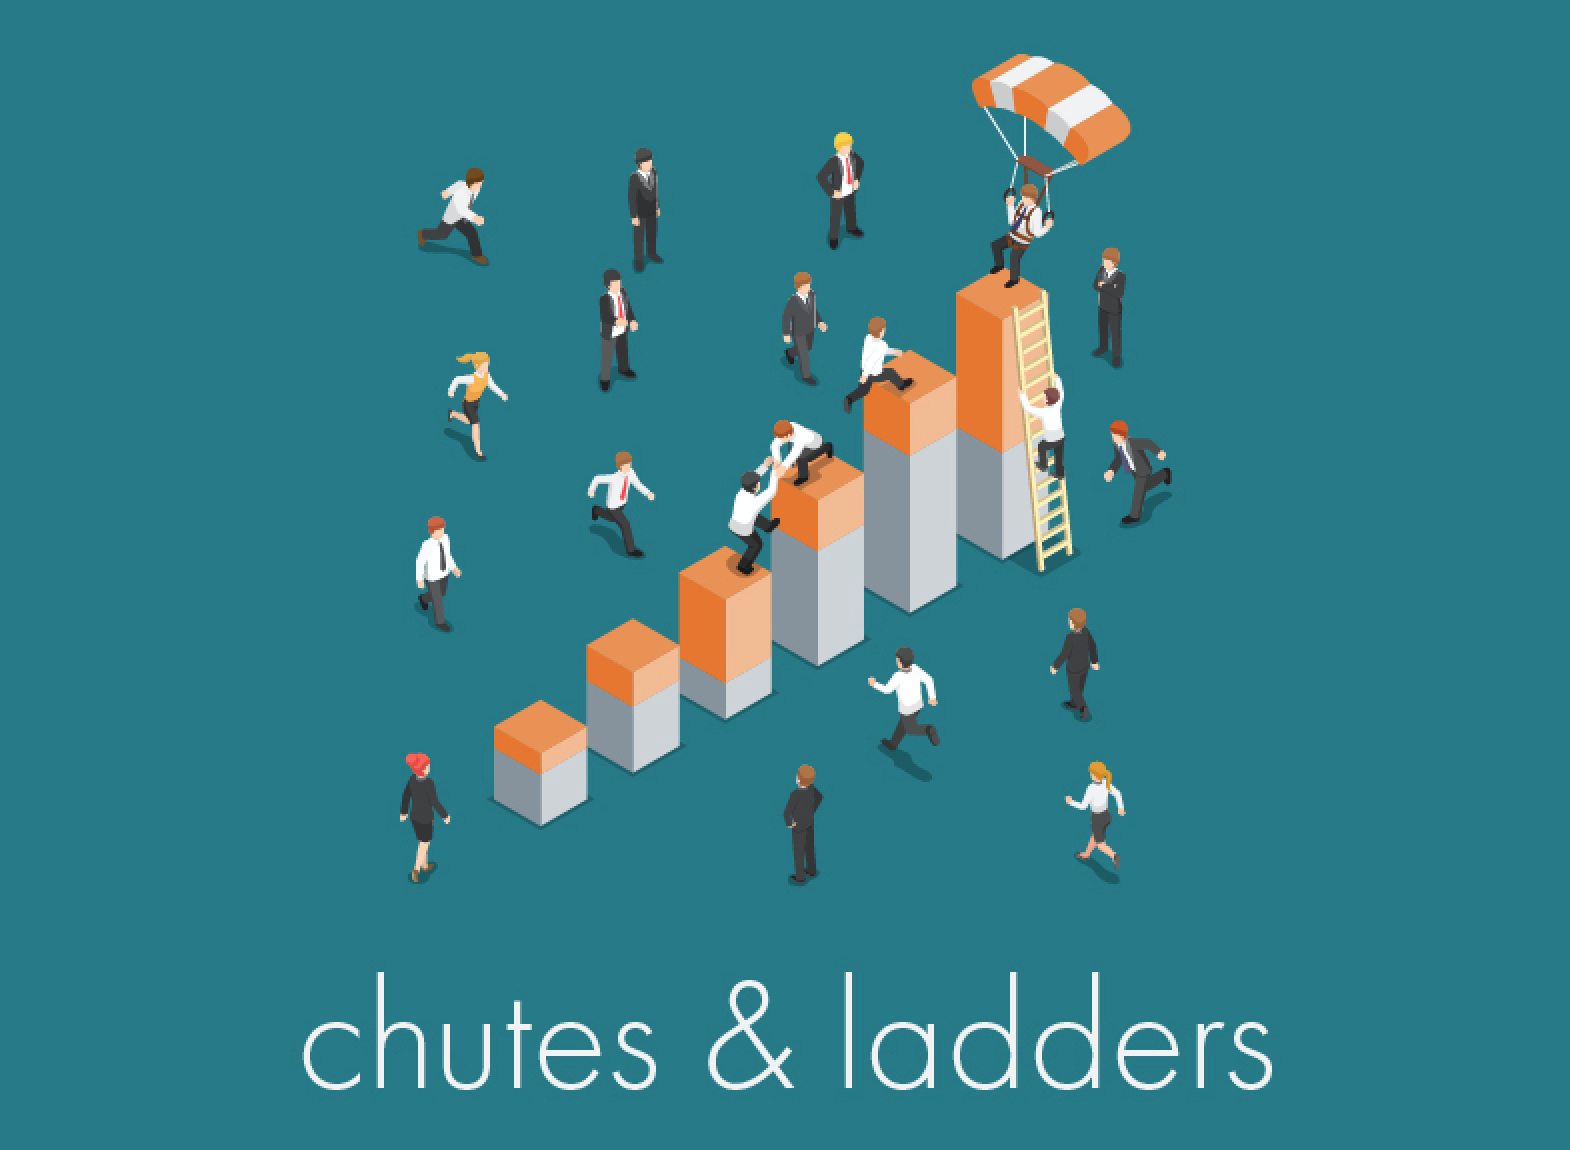 Graphic of workers with parachutes and ladders